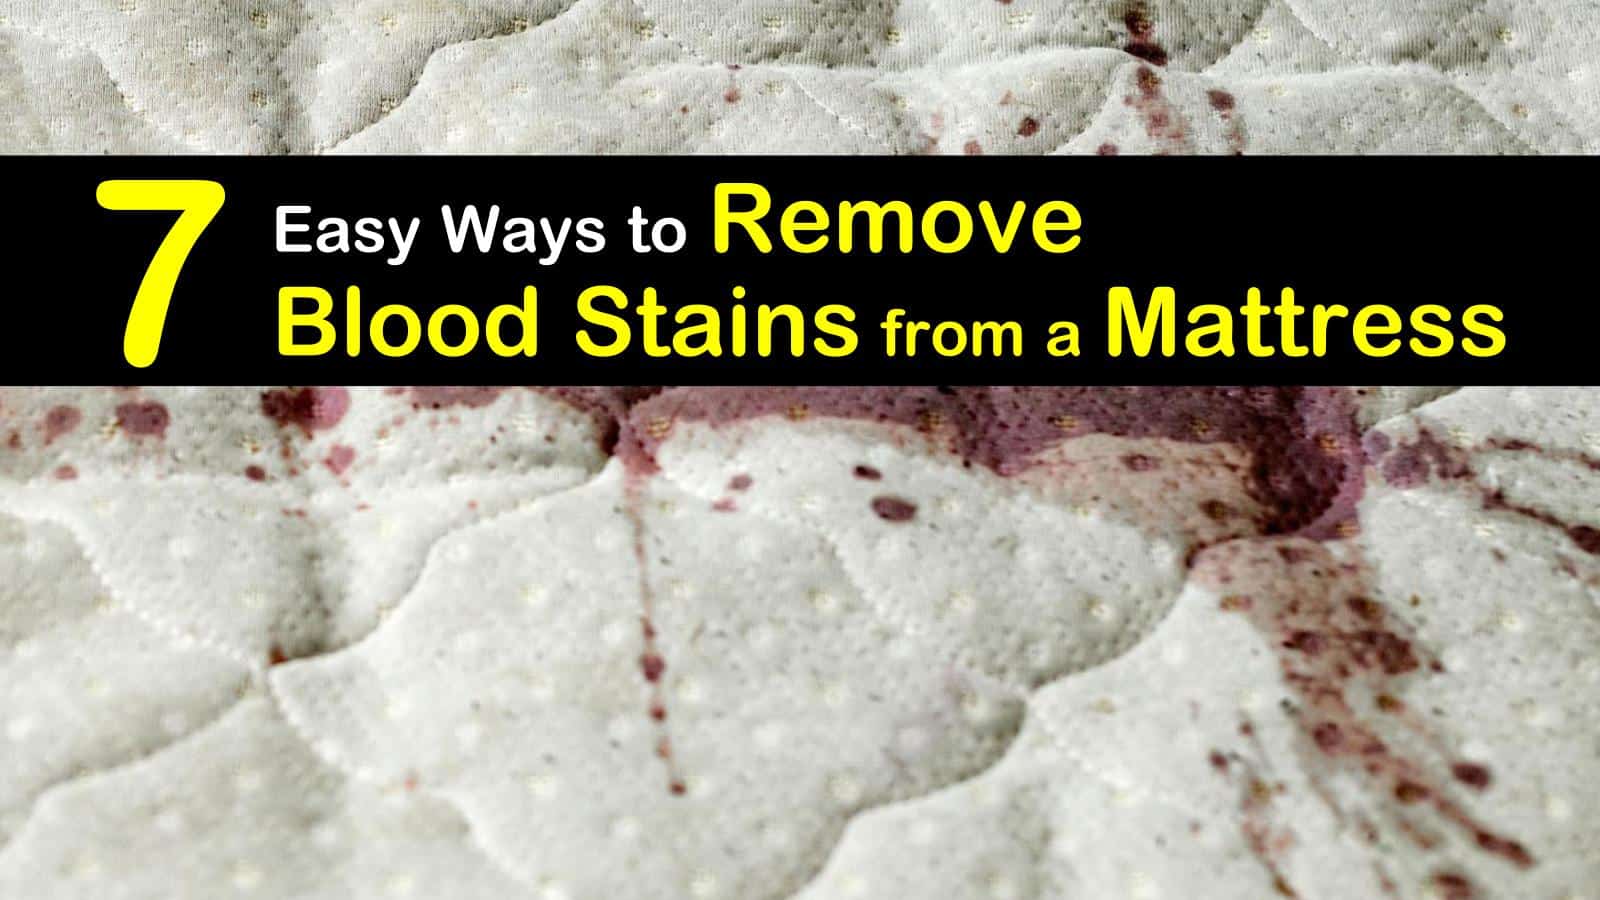 28 Easy Ways to Remove Blood Stains from a Mattress